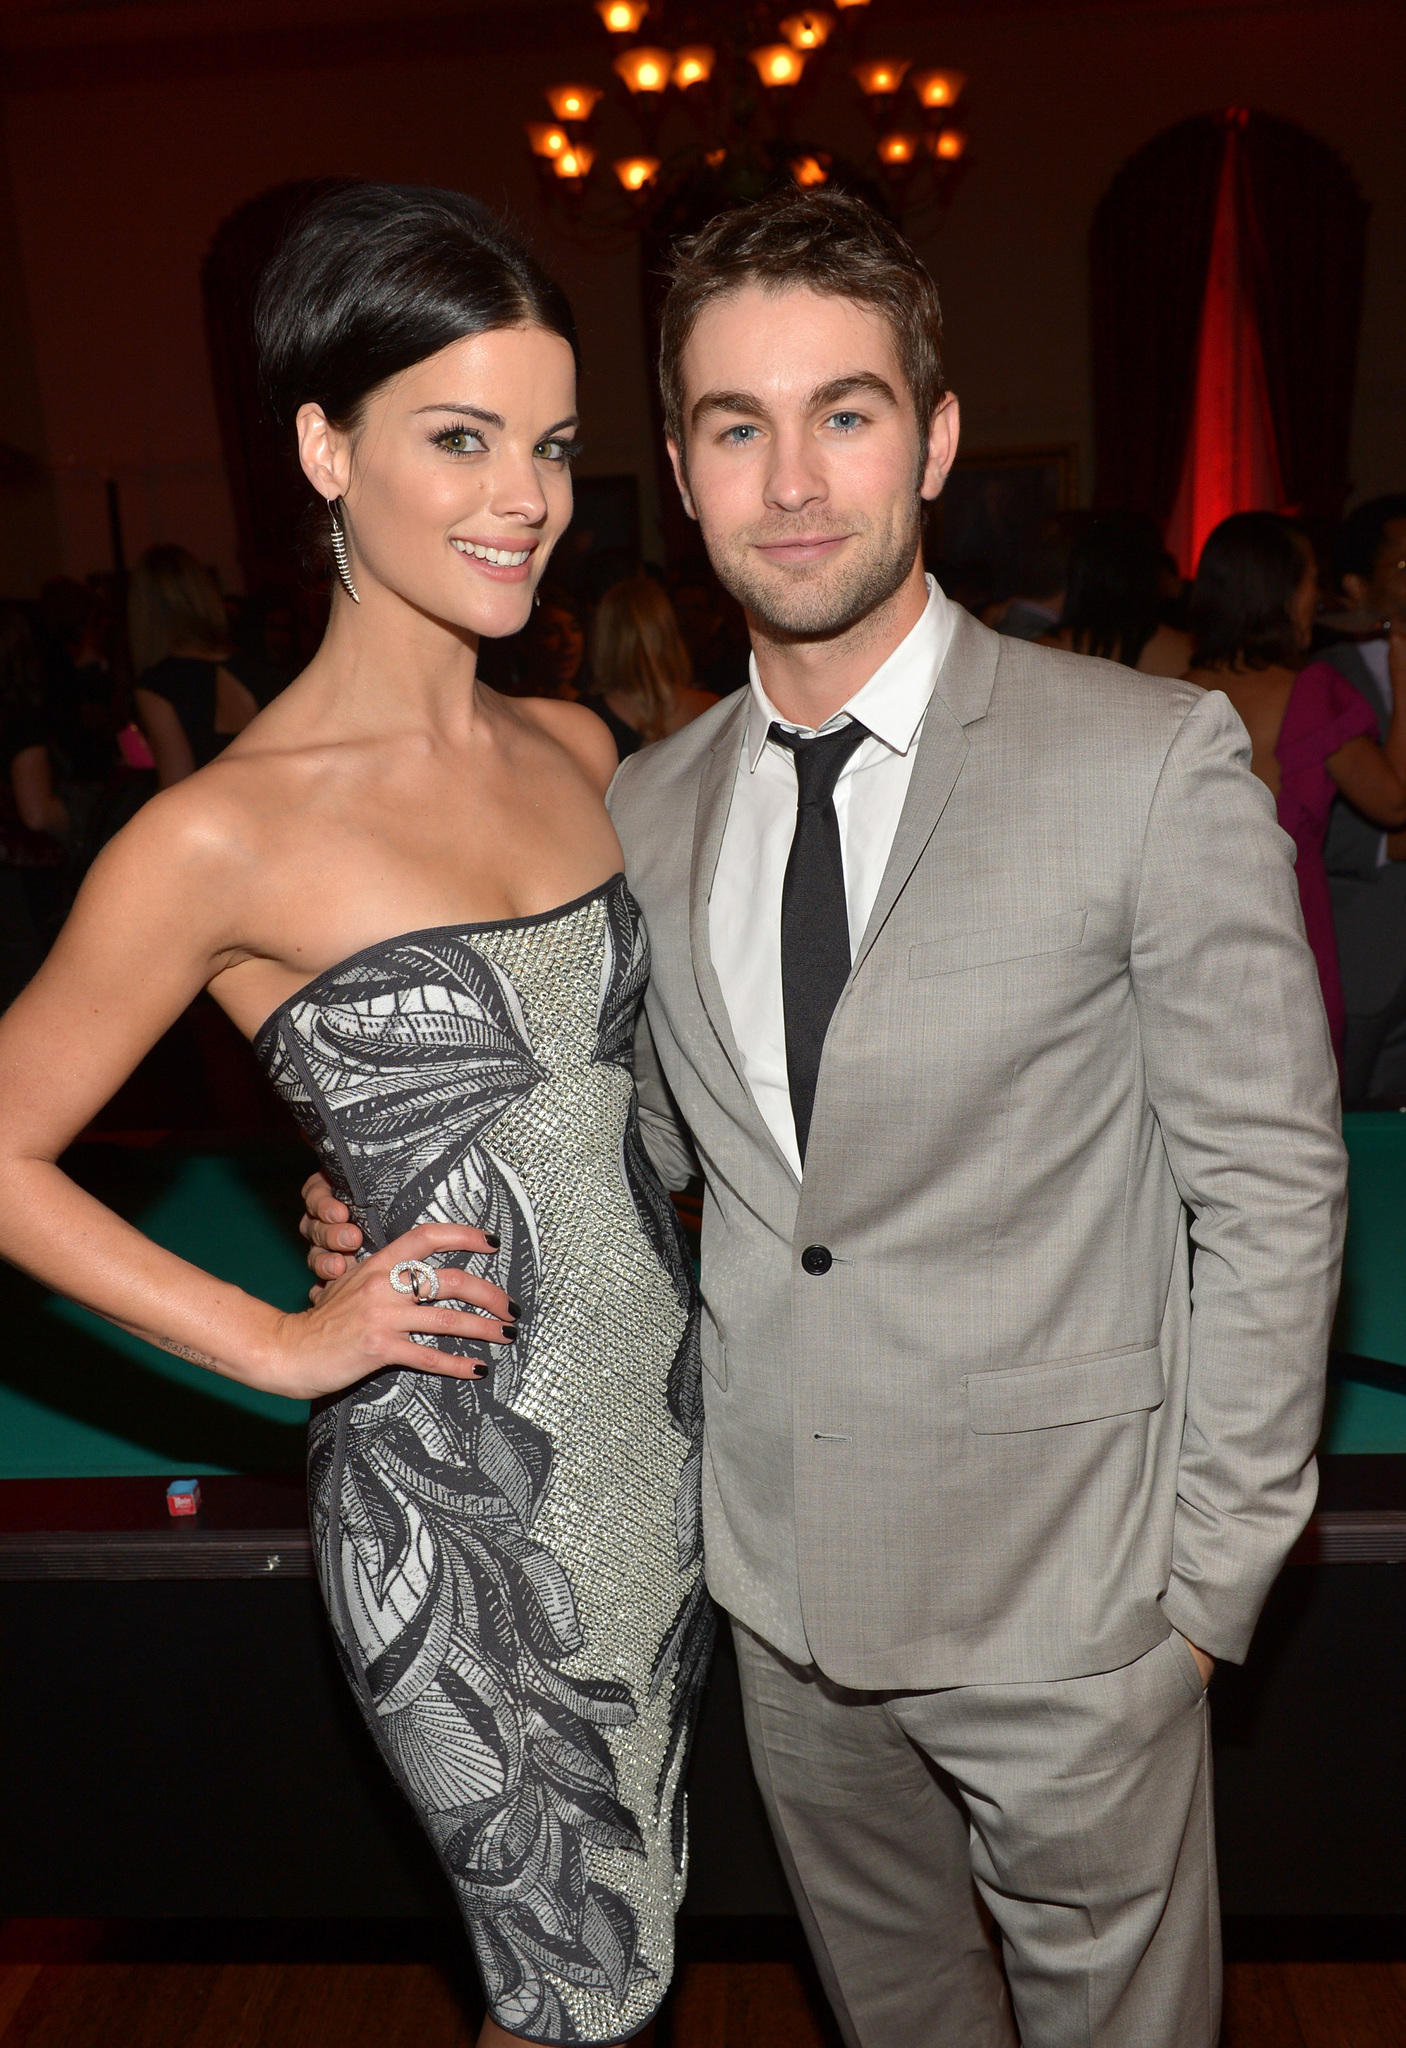 Jaimie Alexander and Chace Crawford